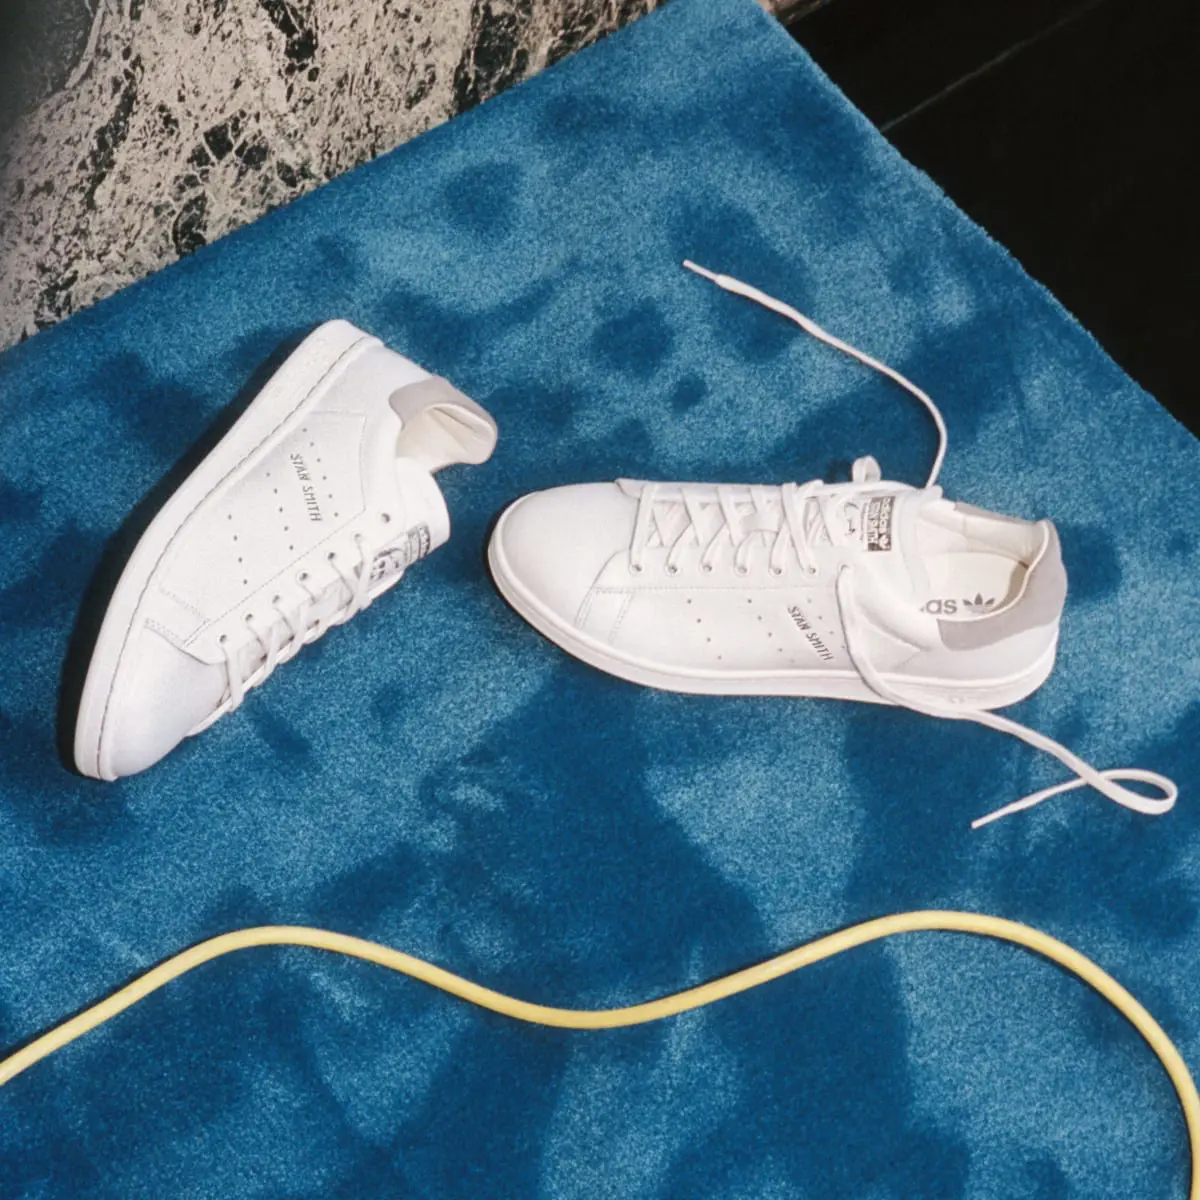 Adidas Stan Smith Lux Shoes. 3